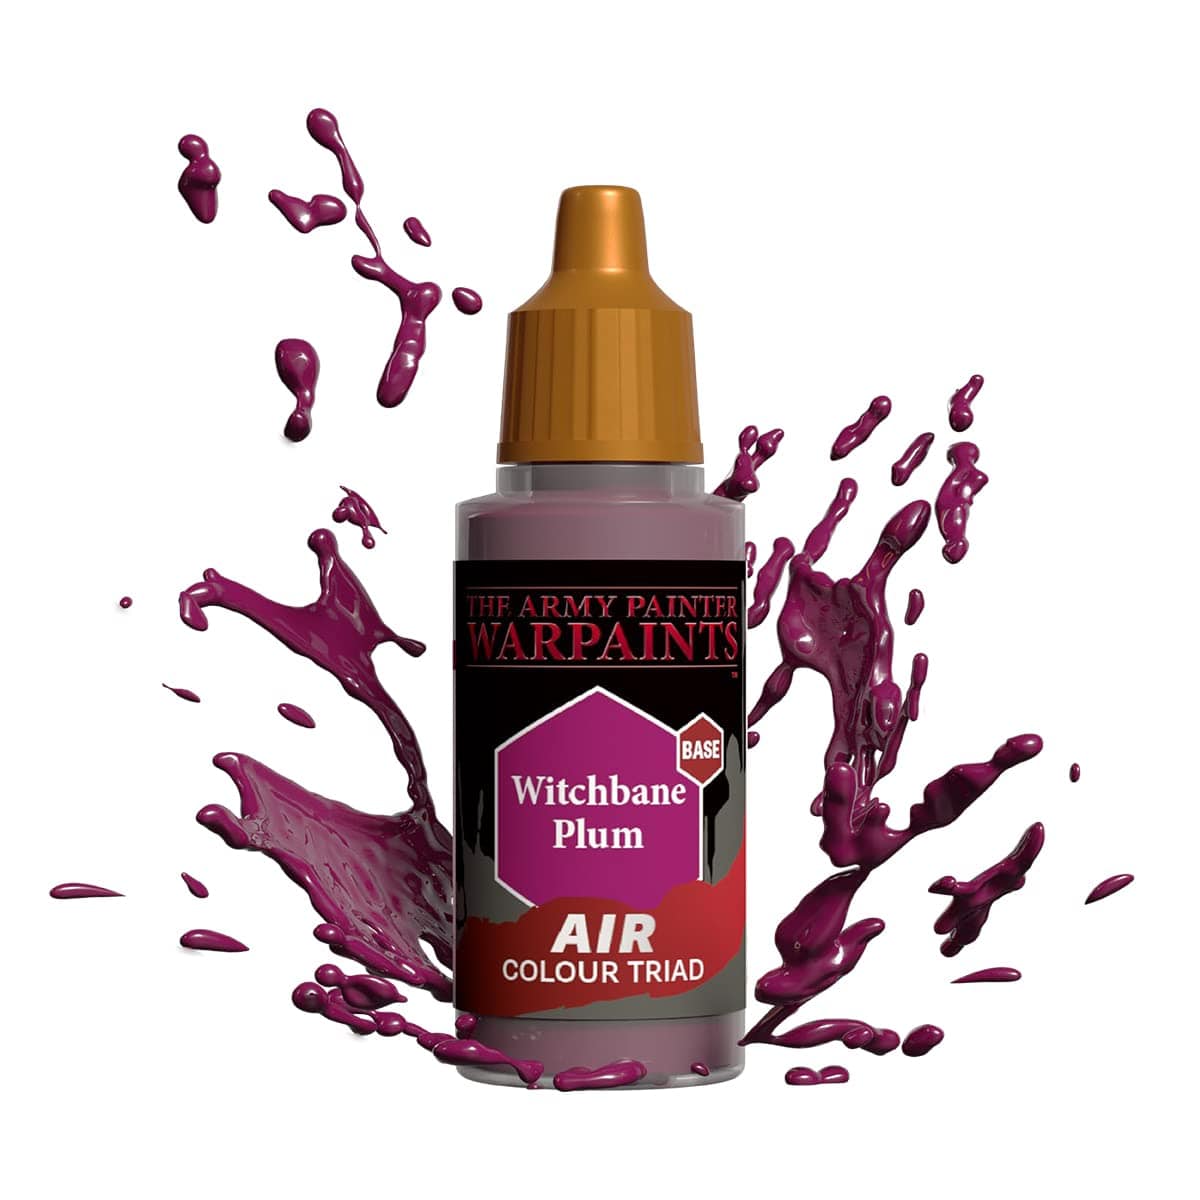 The Army Painter Warpaints Air: Witchbane Plum 18ml - Lost City Toys